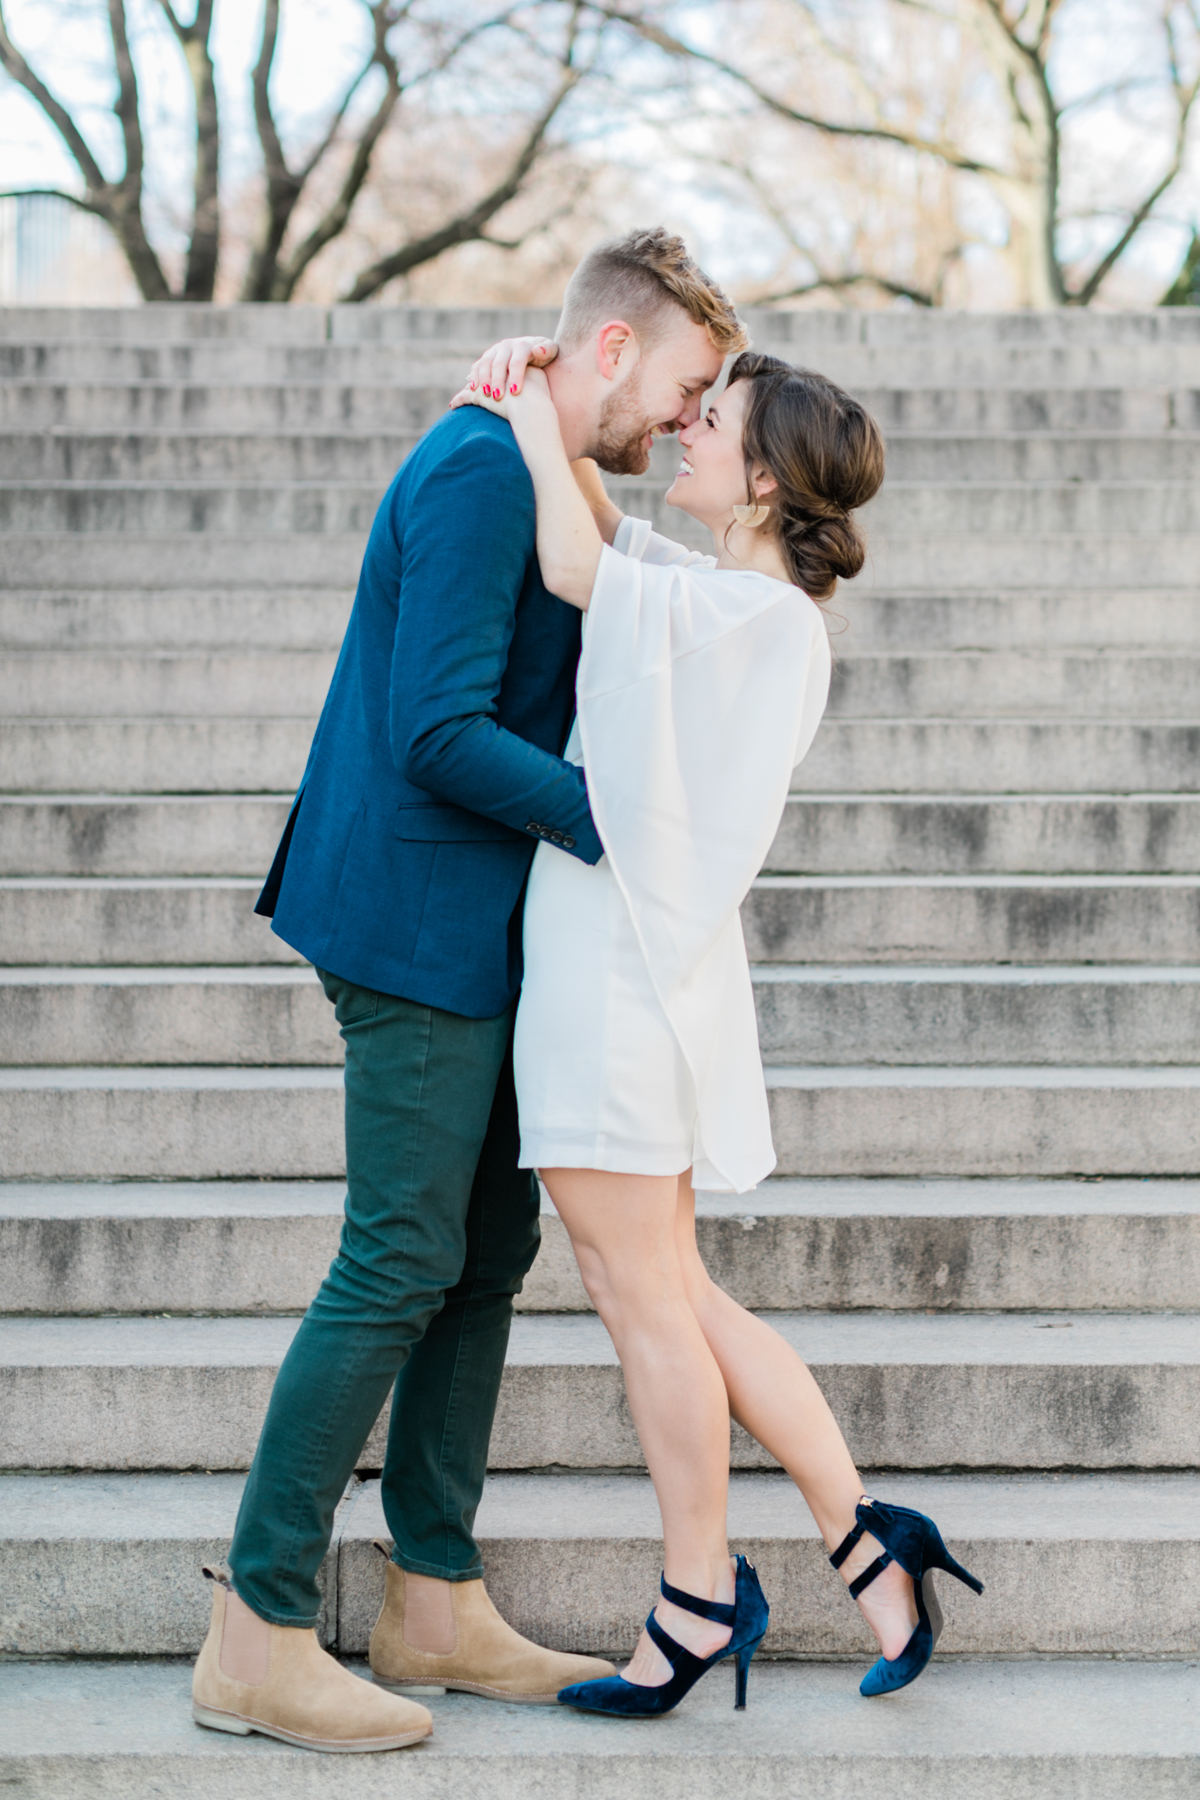 New York City Film Photographer | Central Park Engagement Session | Bethesda Fountain Photos | Bethesda Terrace Engagement Session | Couple on Central Park Stairs